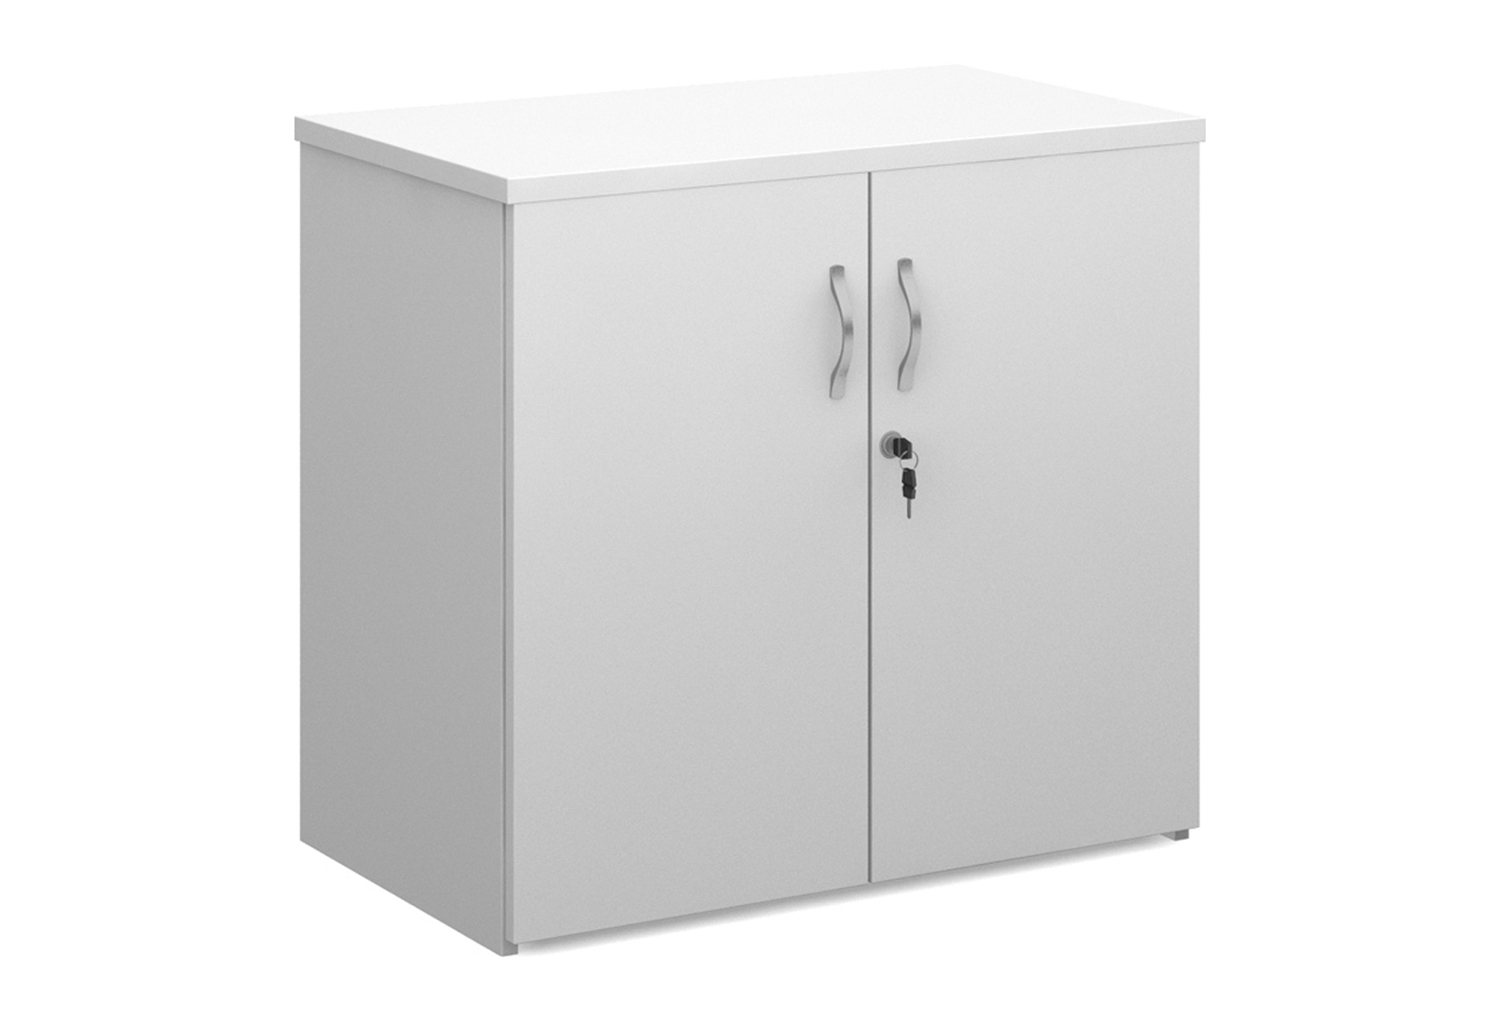 Tandem Double Door Cupboard, 1 Shelf - 80wx47dx74h (cm), White, Express Delivery